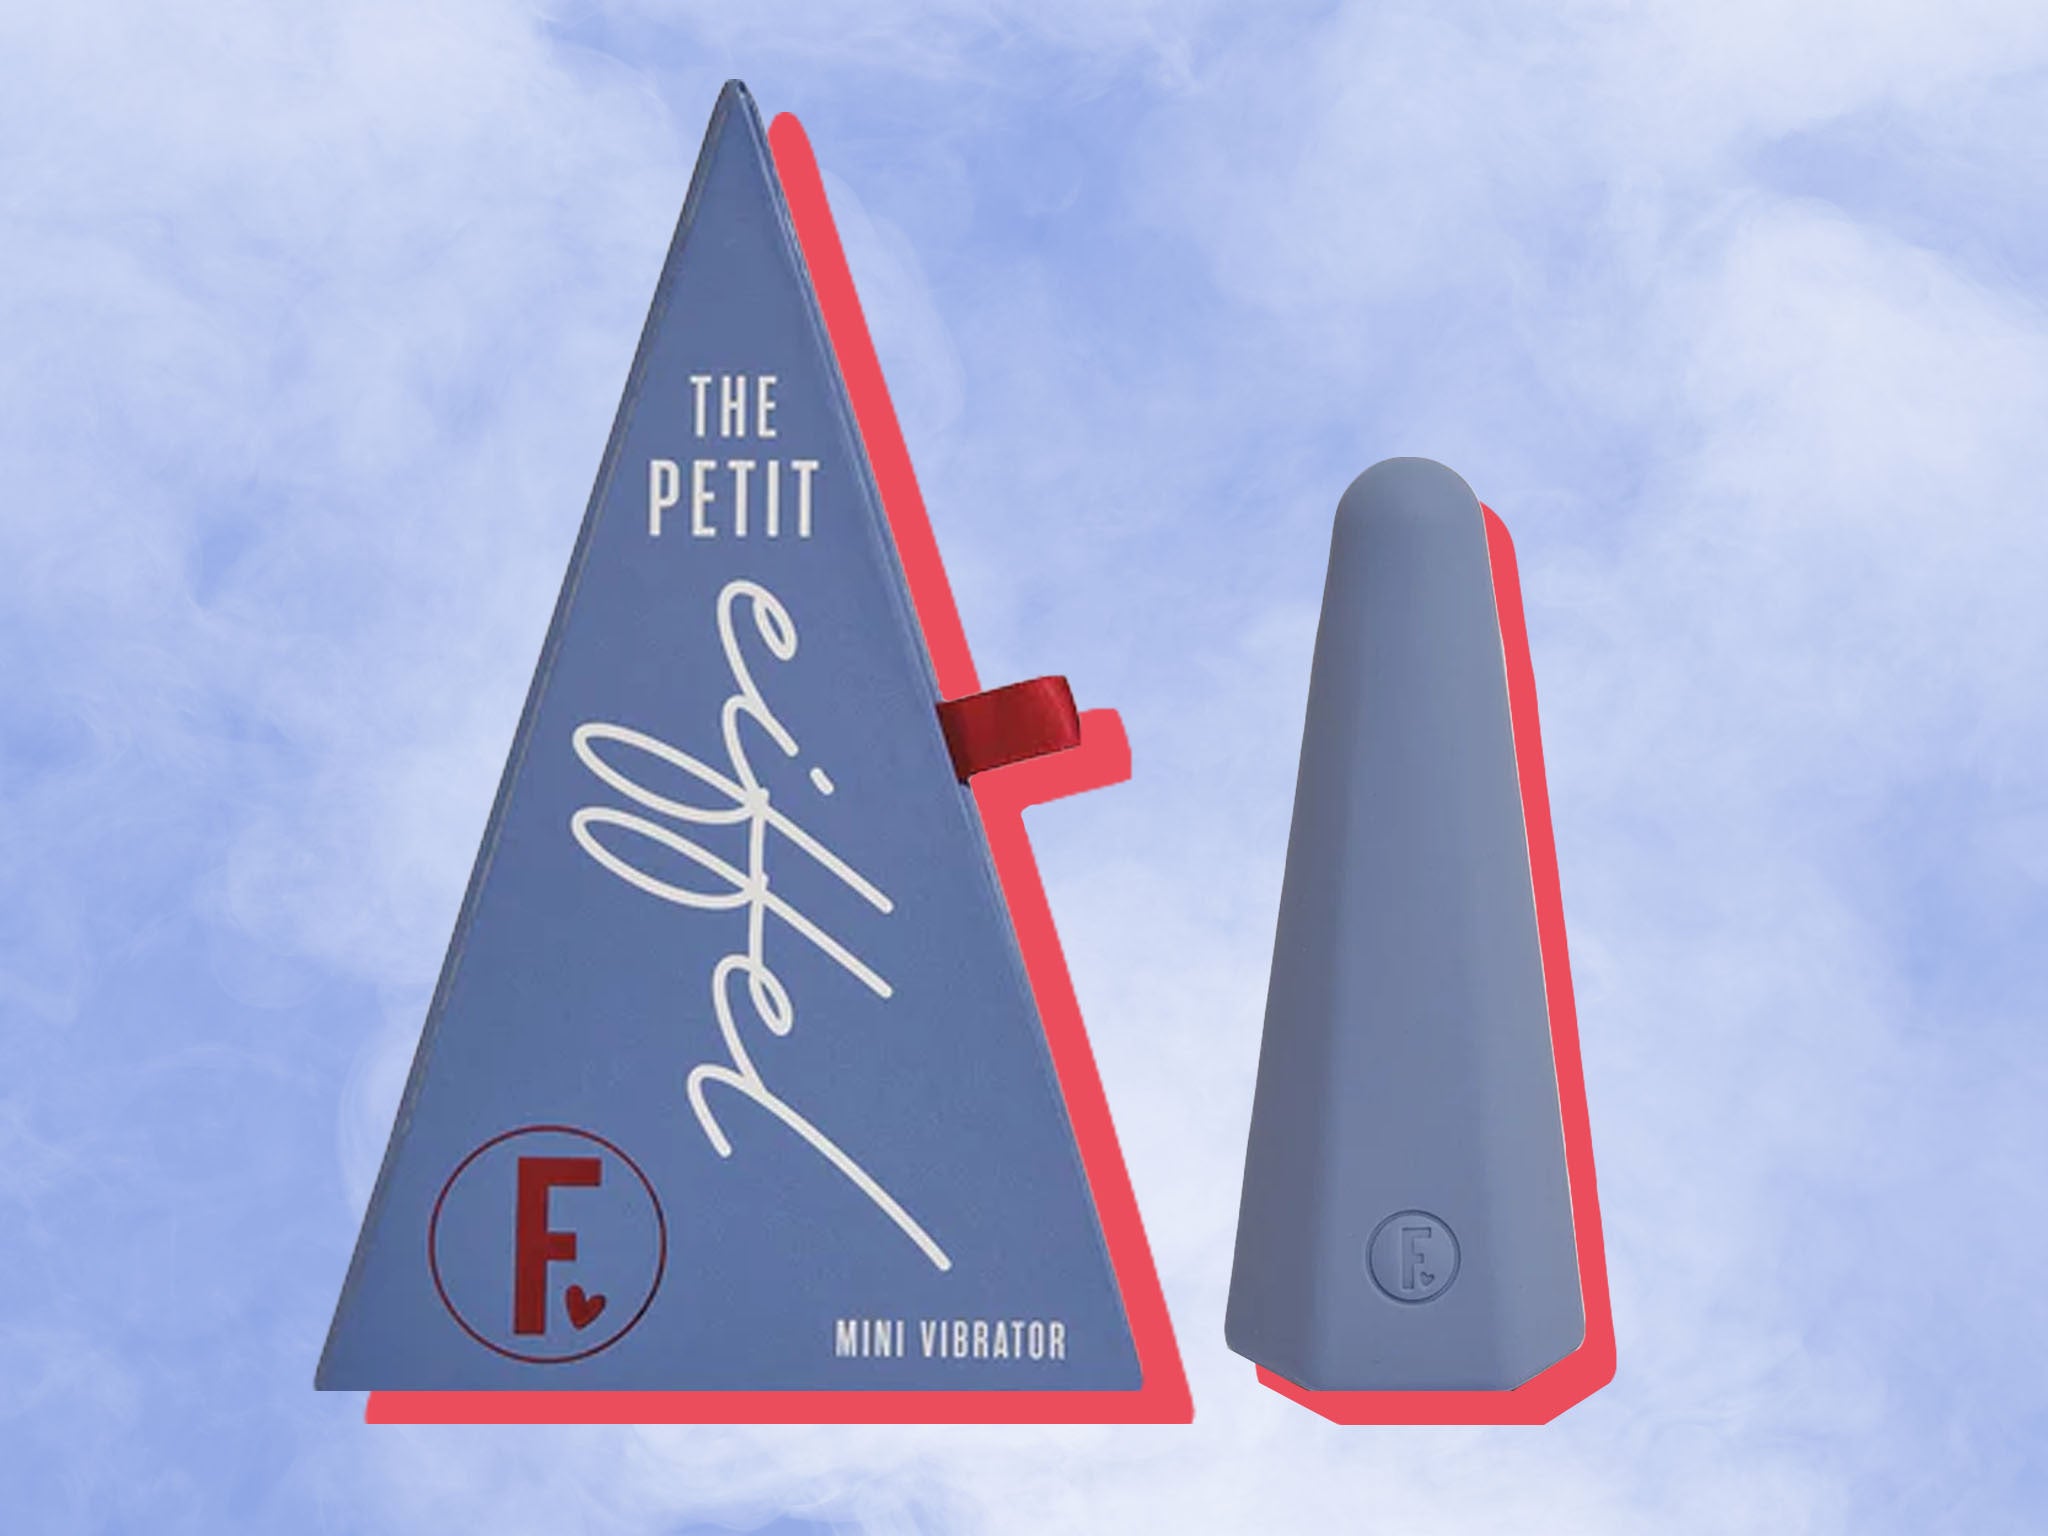 Will this French-monument-inspired sex toy make you go ‘oo la la’?